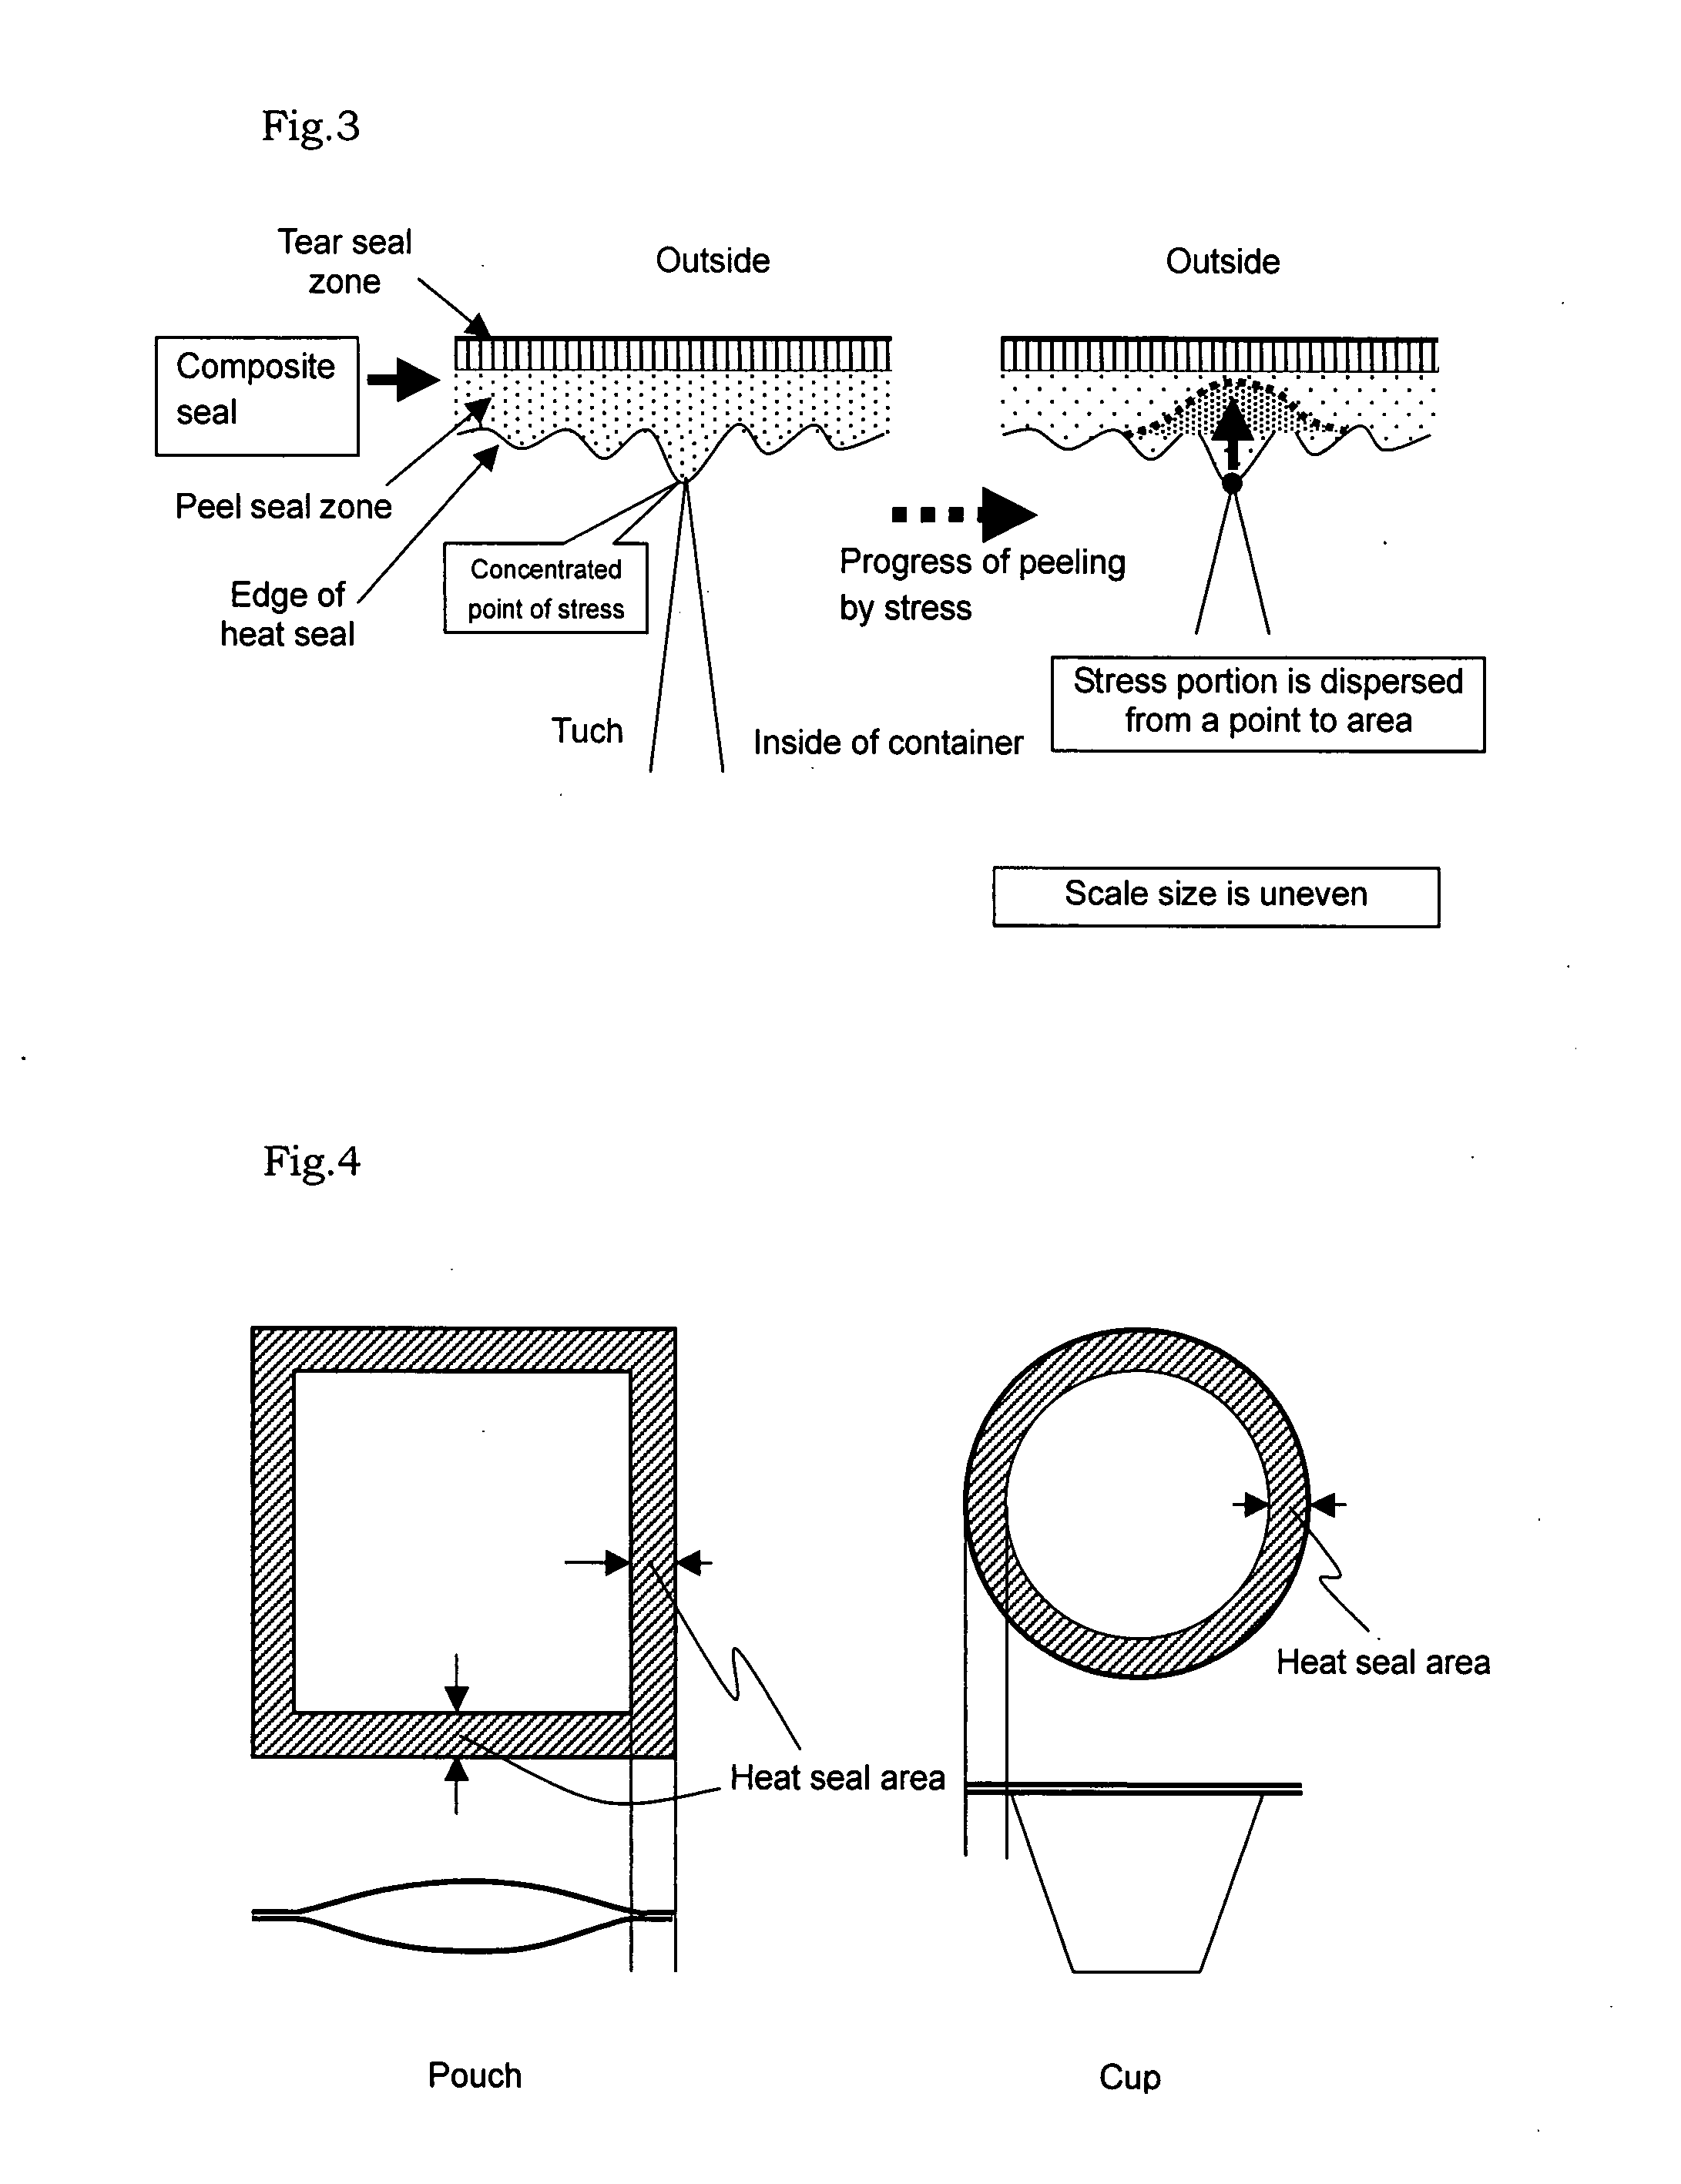 Method of forming composite seal structure of peel seal and tear seal